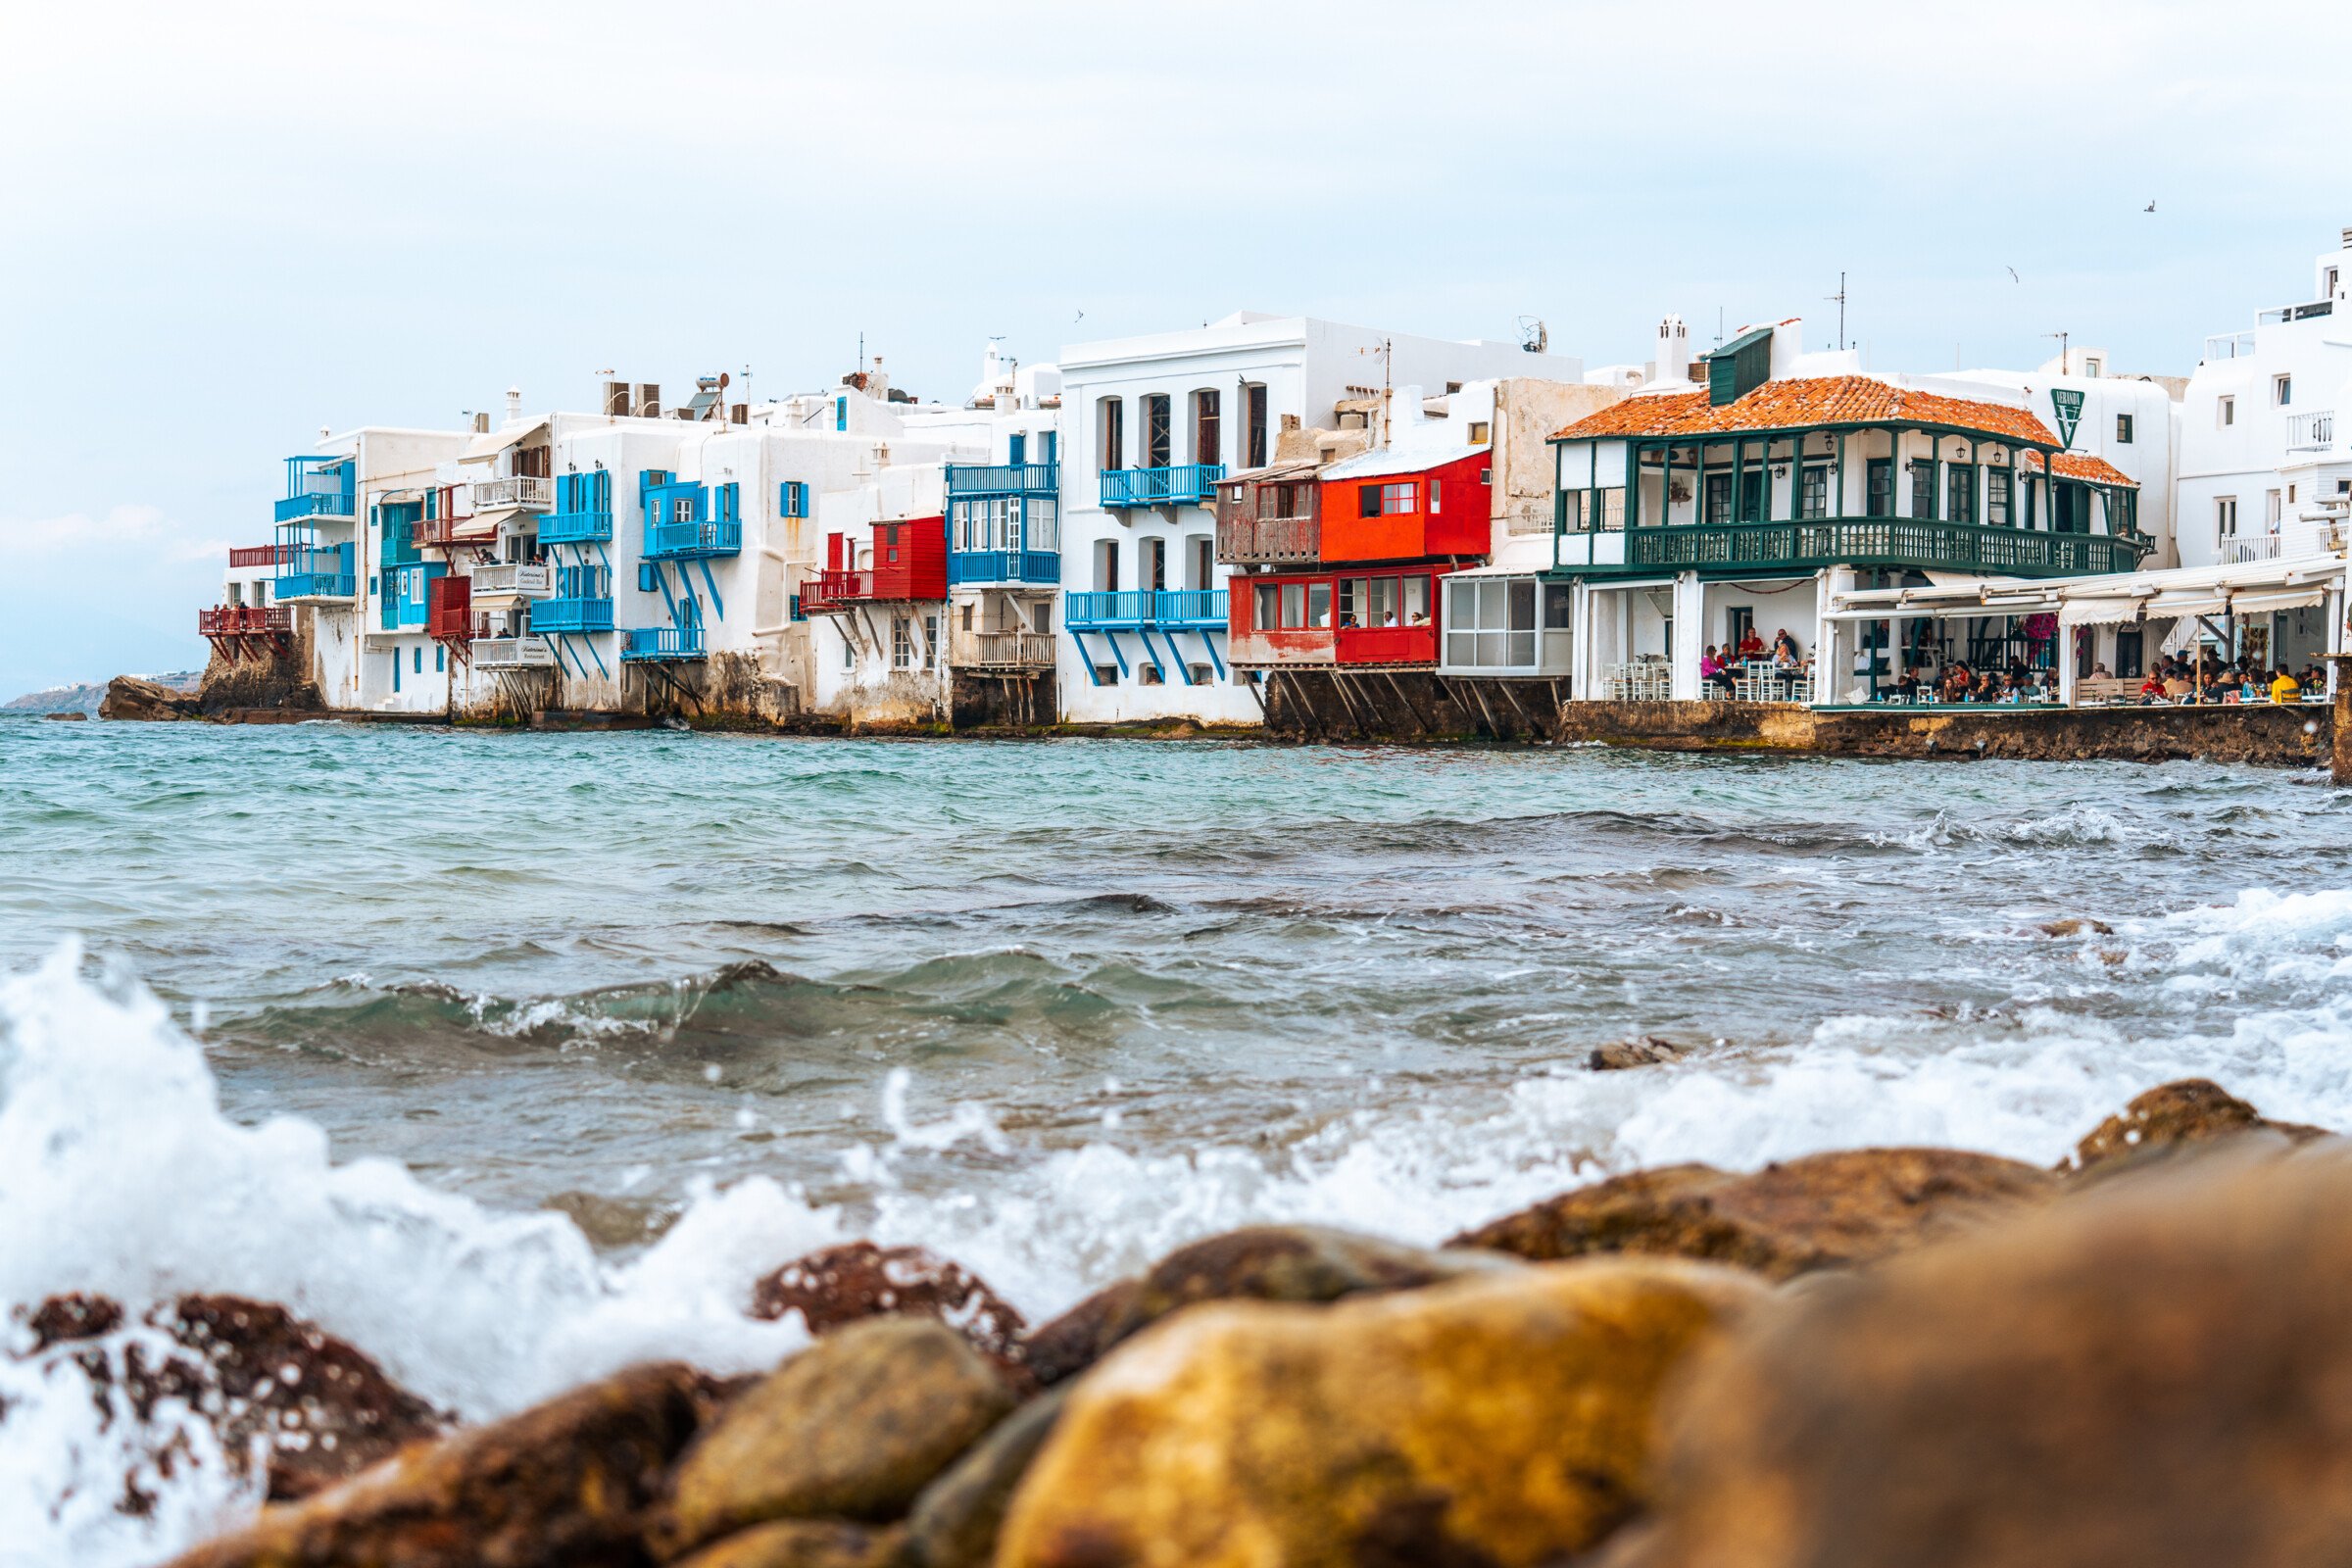 This image shows Little Venice in Mykonos with its characterisitic white houses with colorful wooden balconies built on the edge of the sea. 